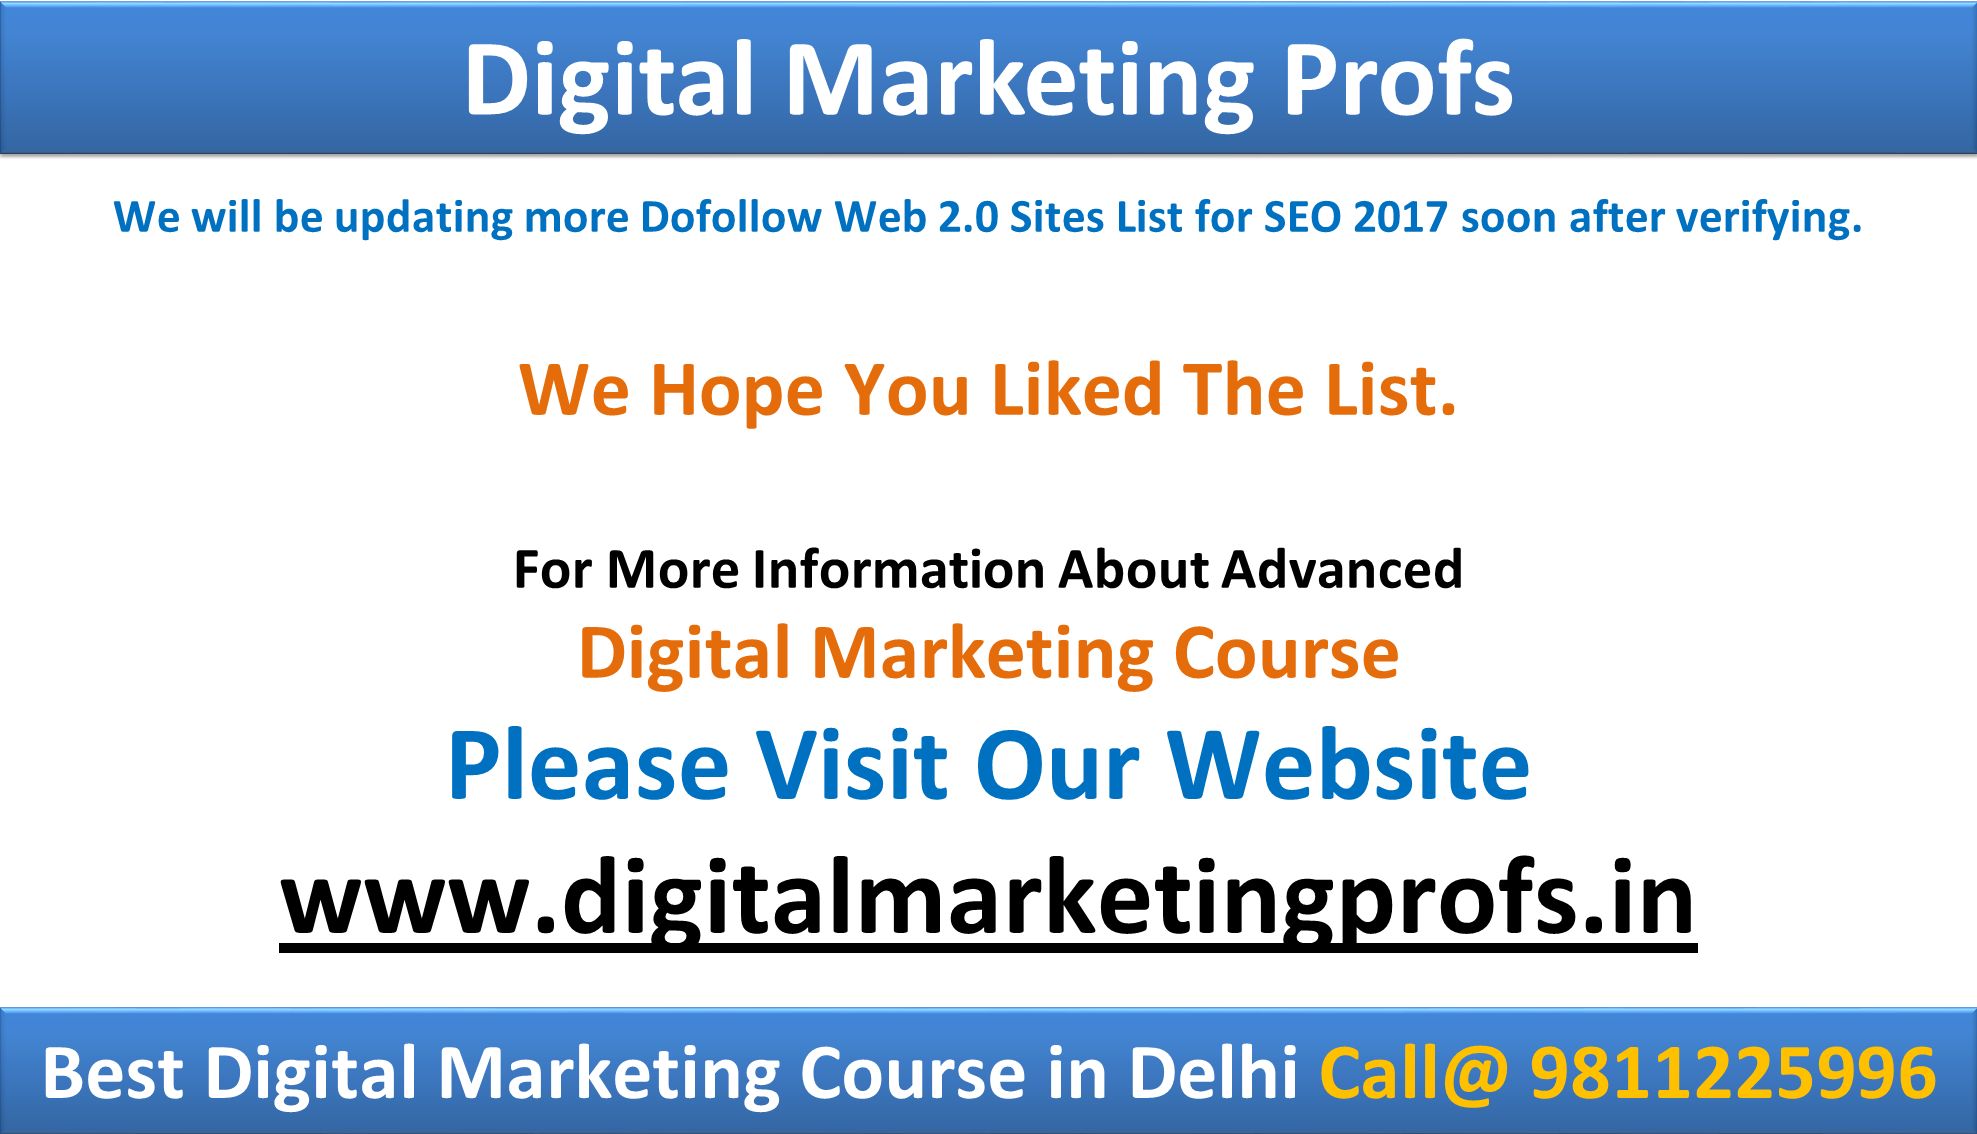 We will be updating more Dofollow Web 2.0 Sites List for SEO 2017 soon after verifying.